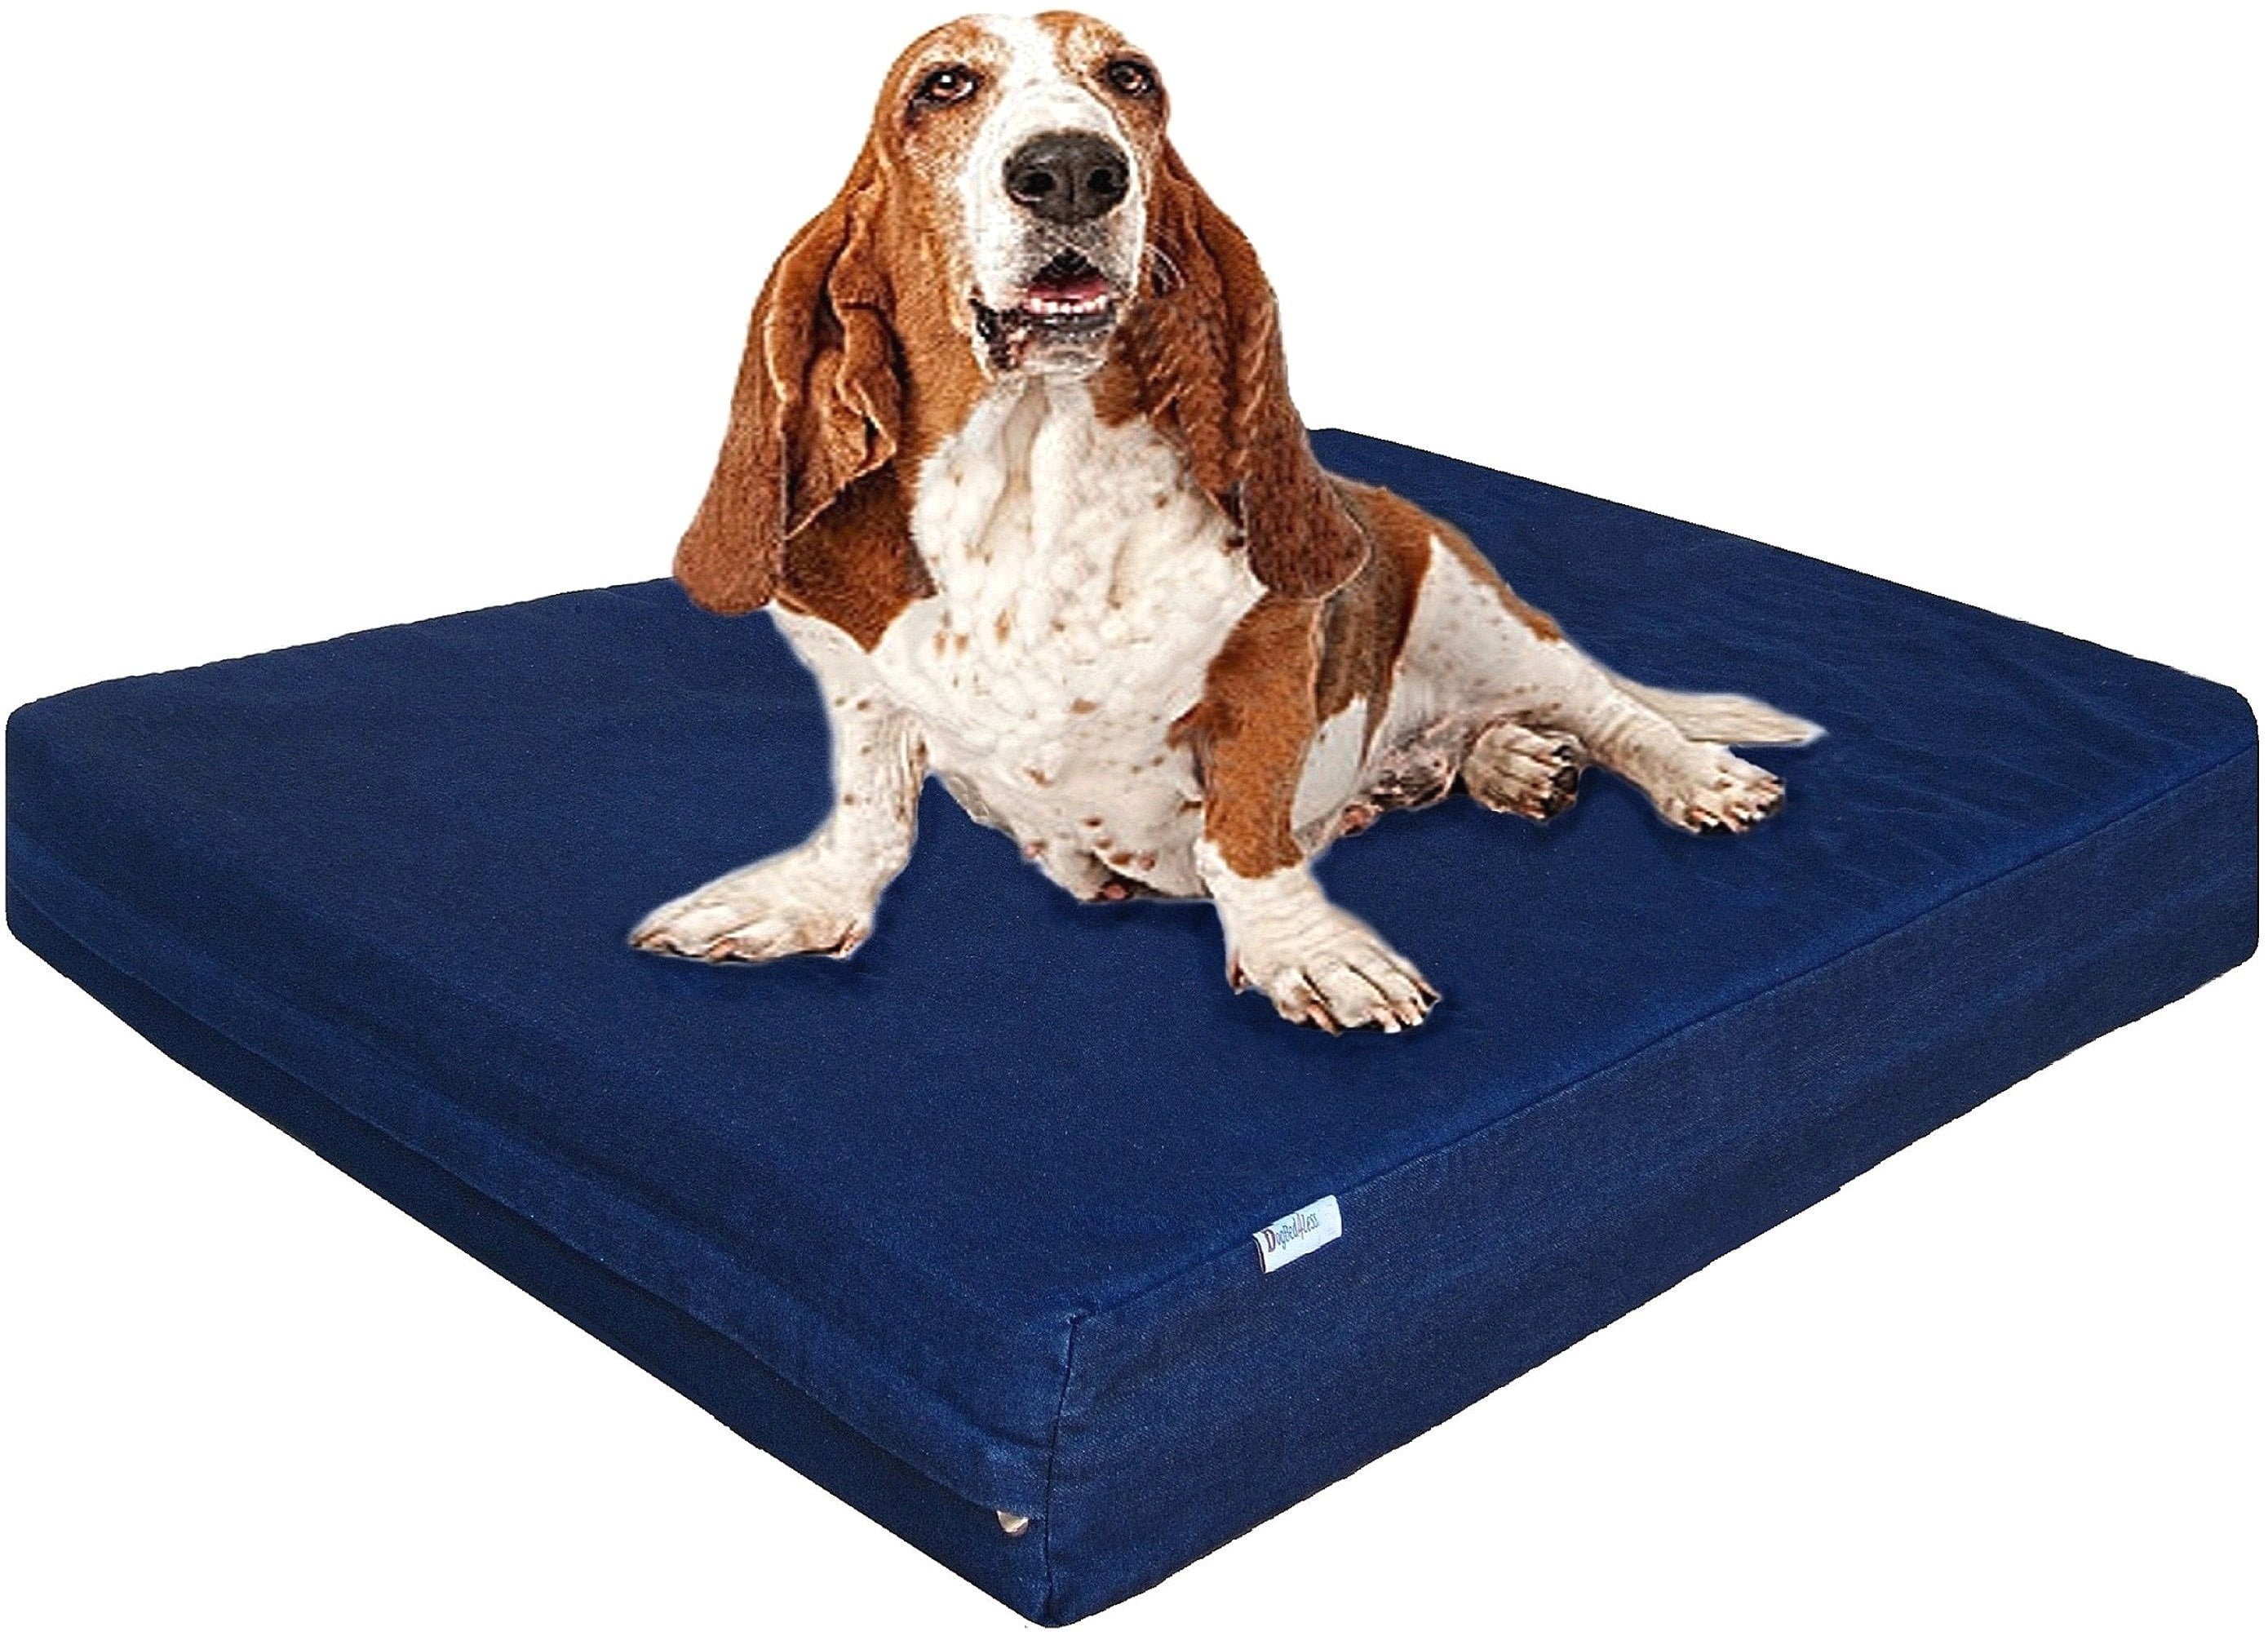 PetBed4Less Premium Orthopedic Memory Foam Pet Bed Dog Bed Small to Super Extra Large Dog w/Removable External Cover Waterproof Dog Bed Liner Free Bonus Replacement case 